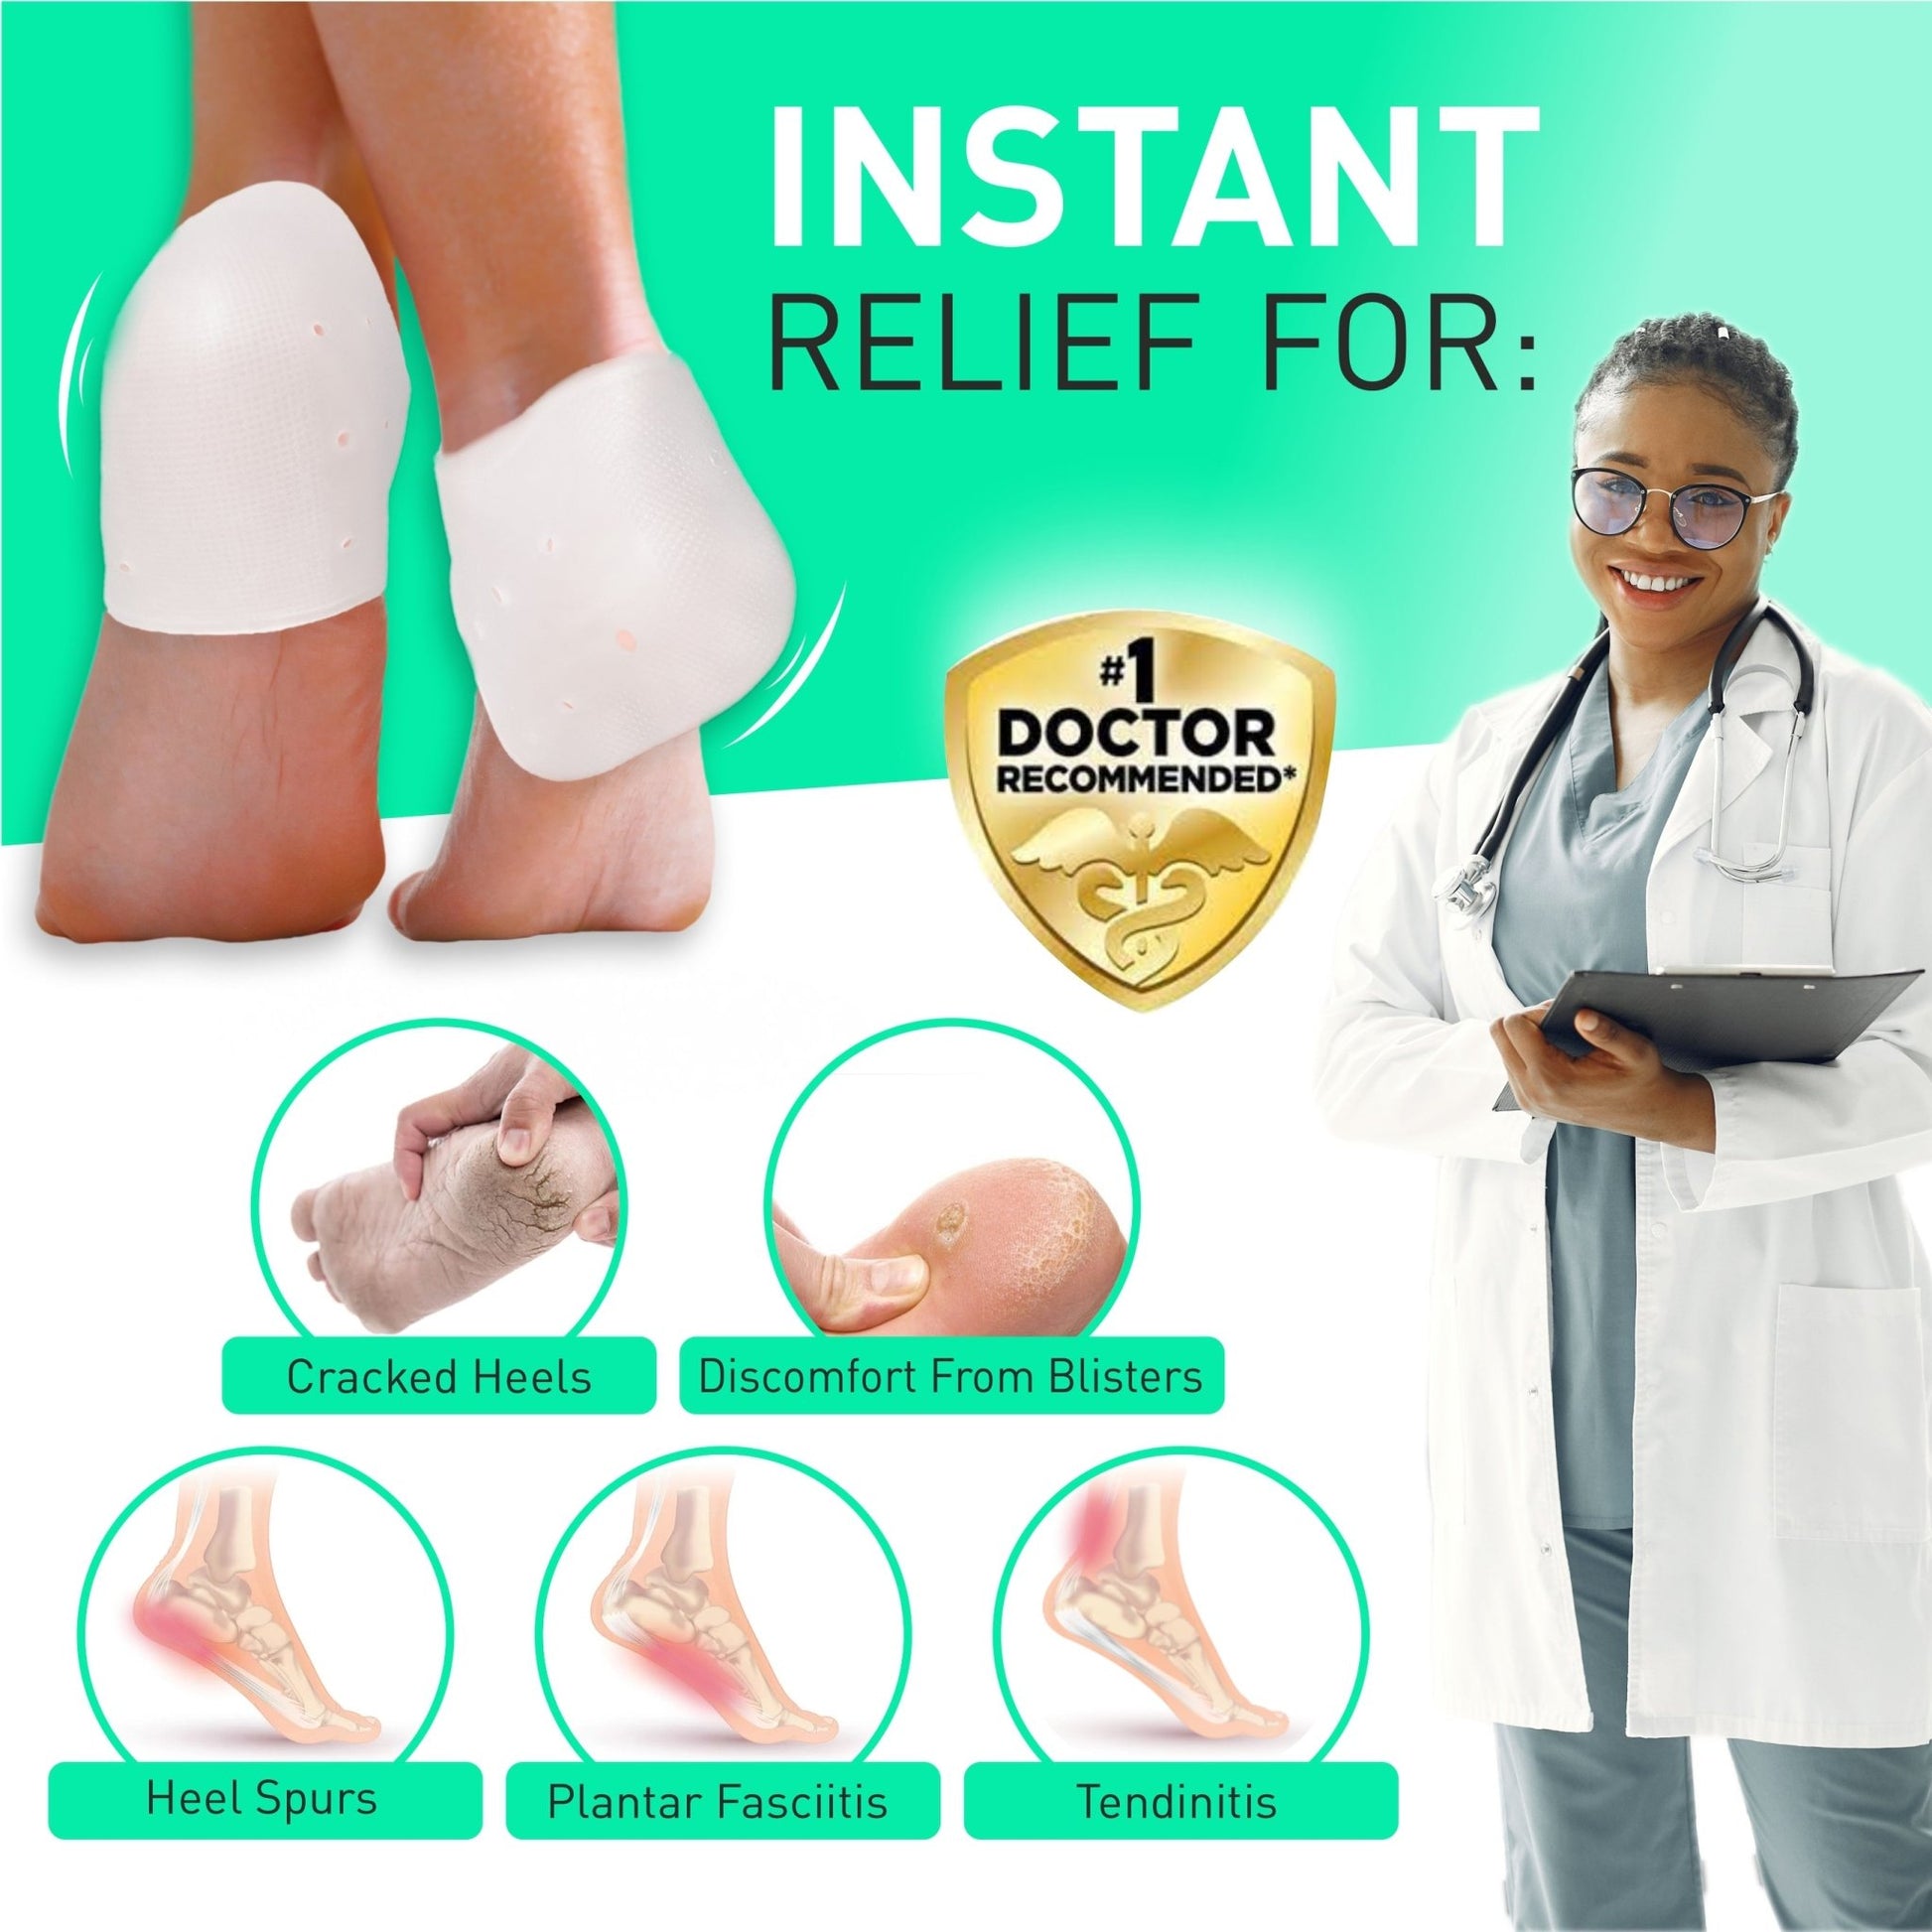 Silicone Heel Protectors (2 Pairs) to Prevent Blisters and Cracked Heels - aZengear